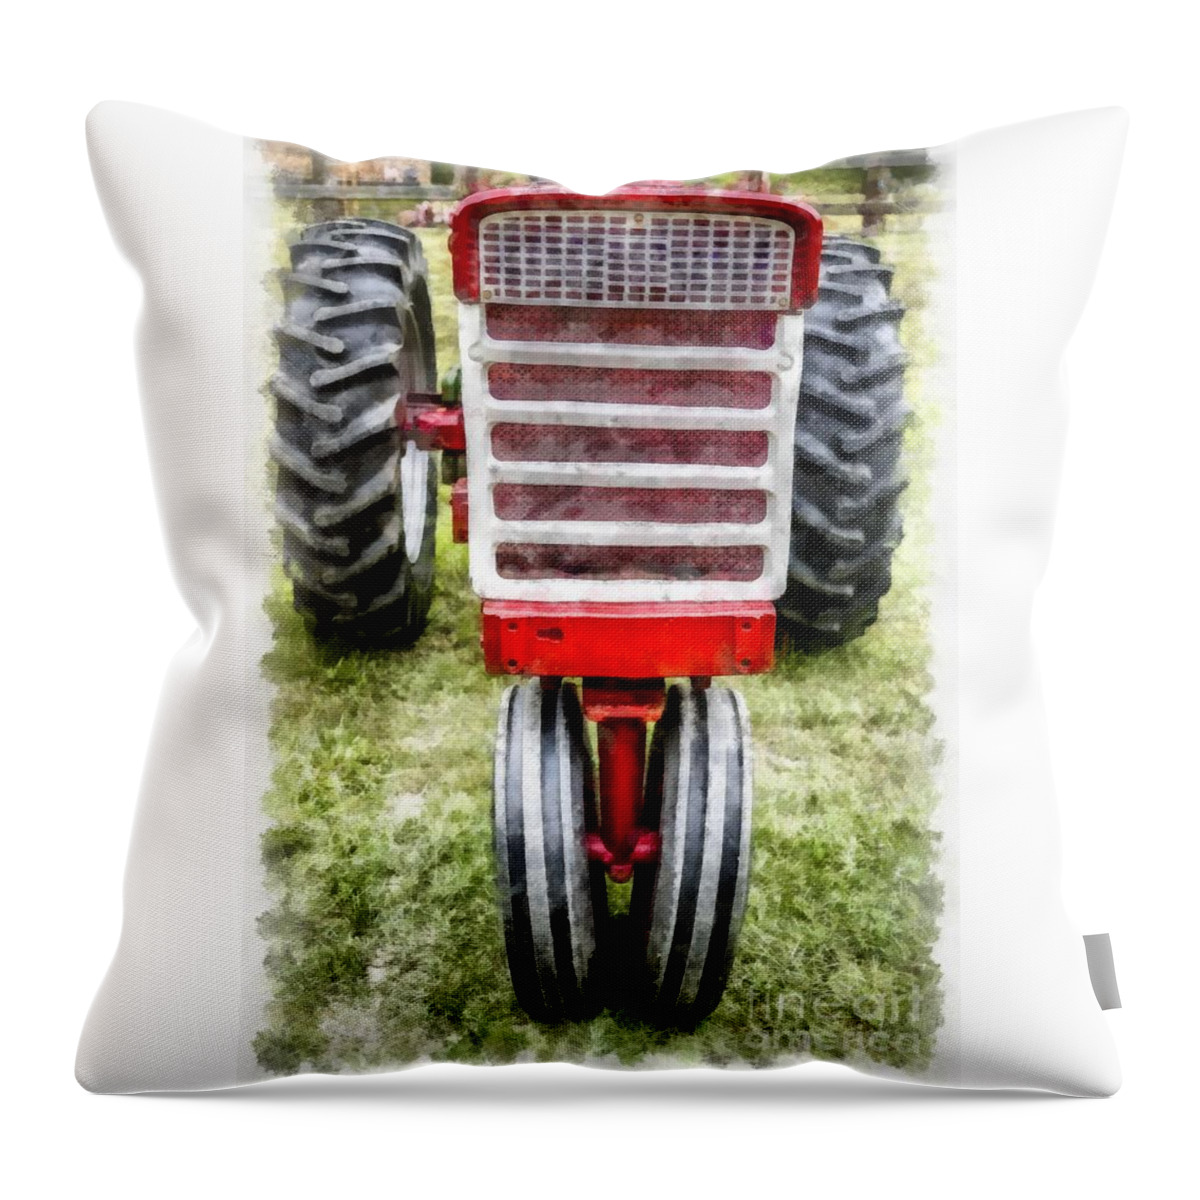 Tractor Throw Pillow featuring the photograph Vintage International Harvester Tractor by Edward Fielding